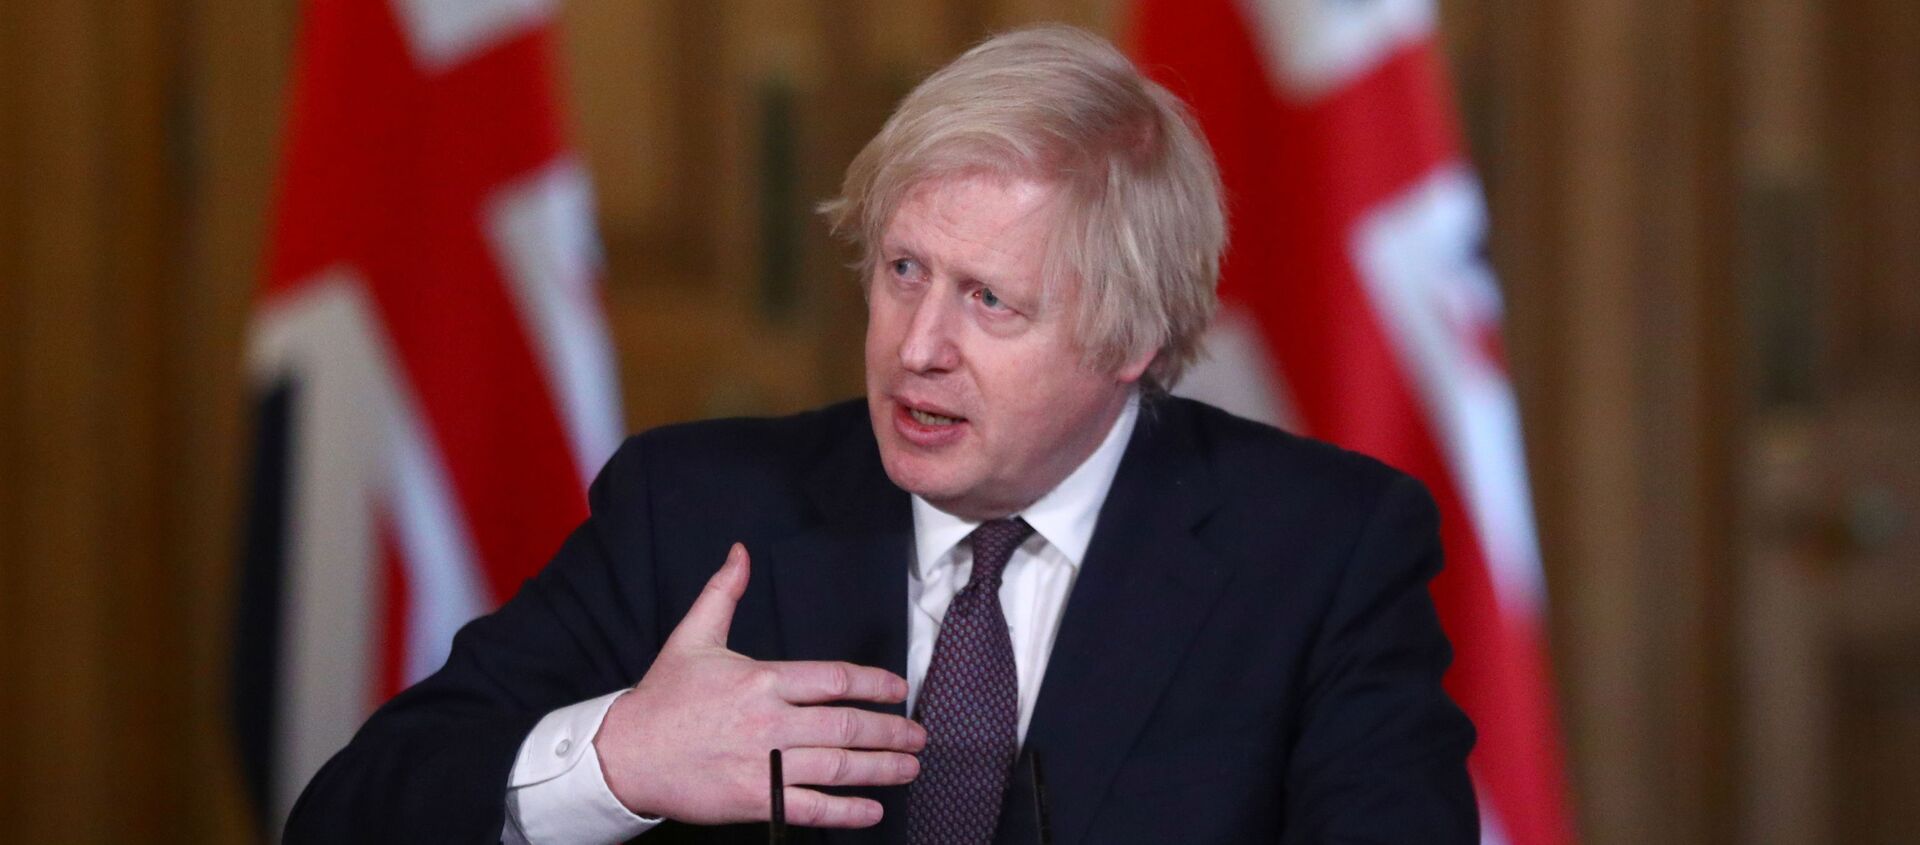 Britain's Prime Minister Boris Johnson holds a virtual news conference at 10 Downing Street, amid the coronavirus disease (COVID-19) outbreak, in London, Britain, March 8, 2021. - Sputnik International, 1920, 14.03.2021